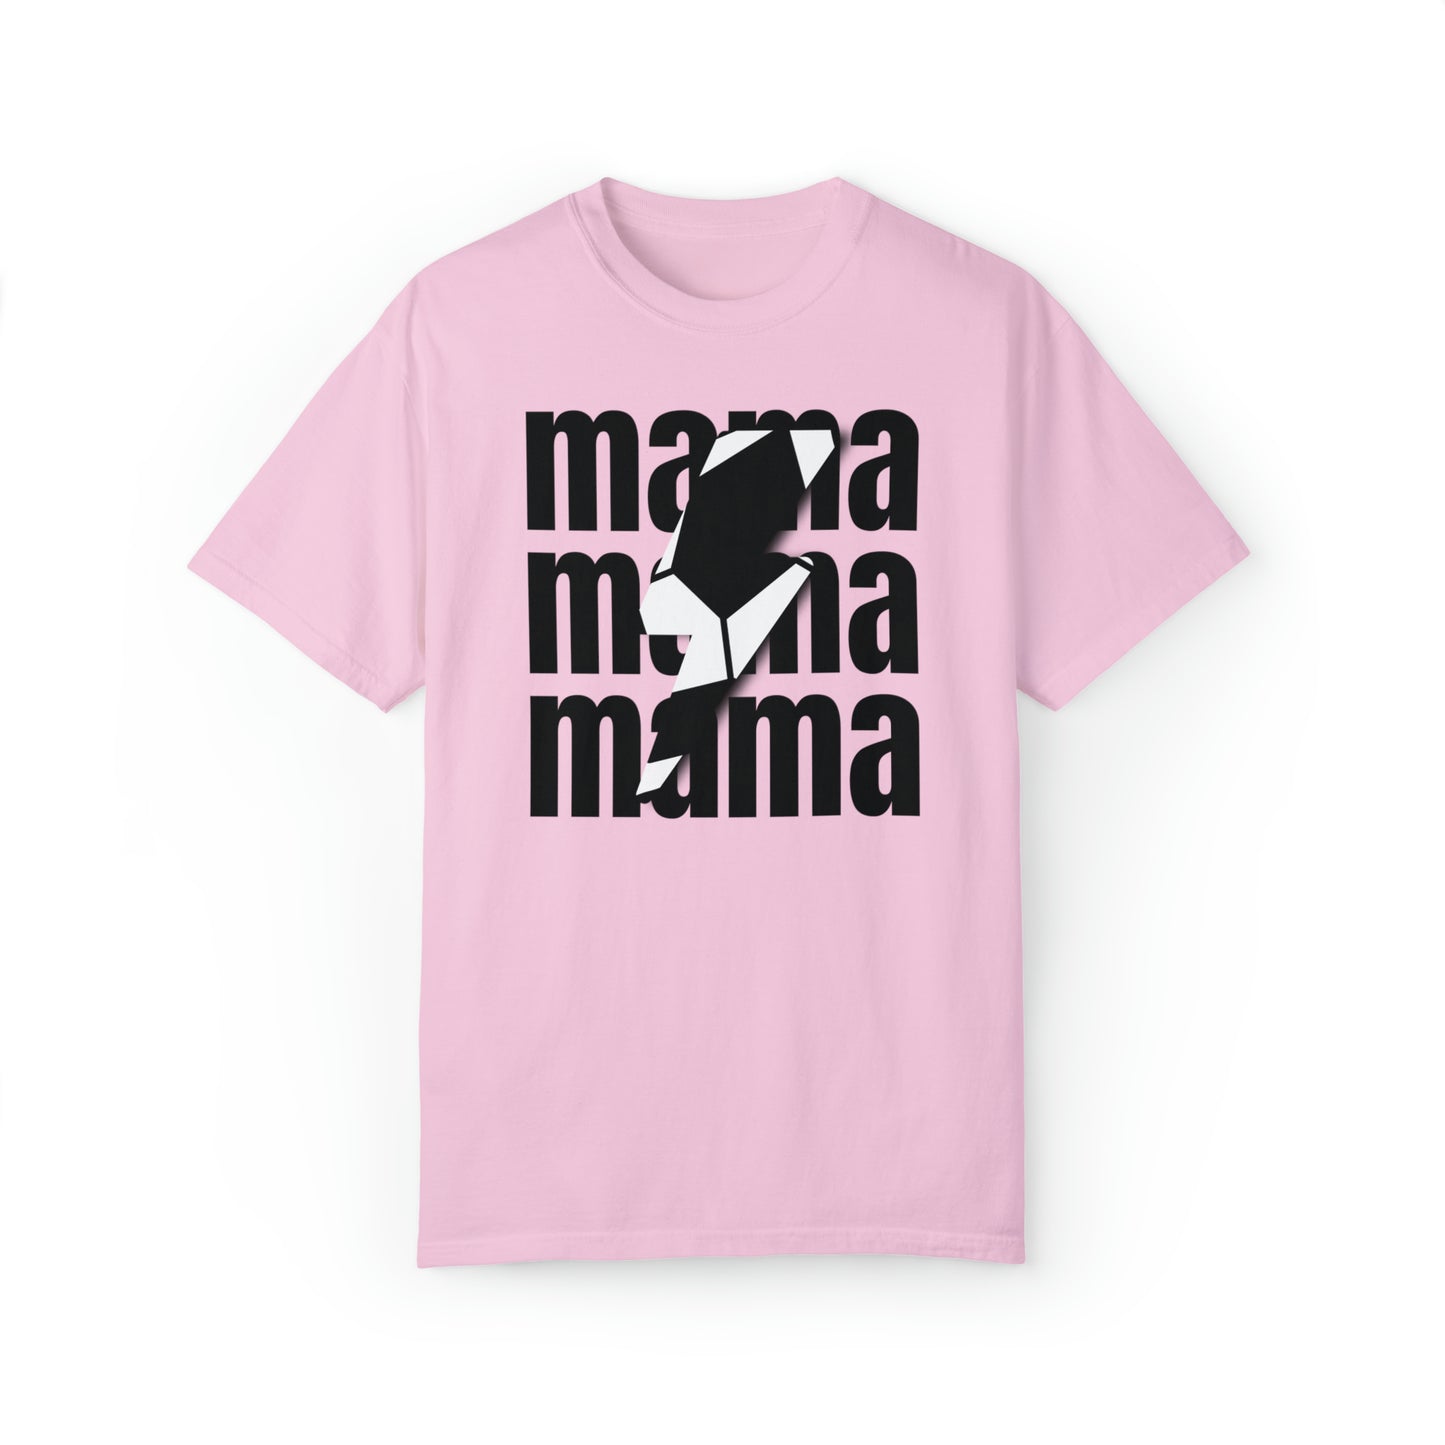 Soccer Mom Mama Shirt, Soccer Jersey, Mom Sports Game Day Shirt, Cool Trendy Cute Soccer Shirt, Mom Shirt, Gift for Mom, Coach Gift